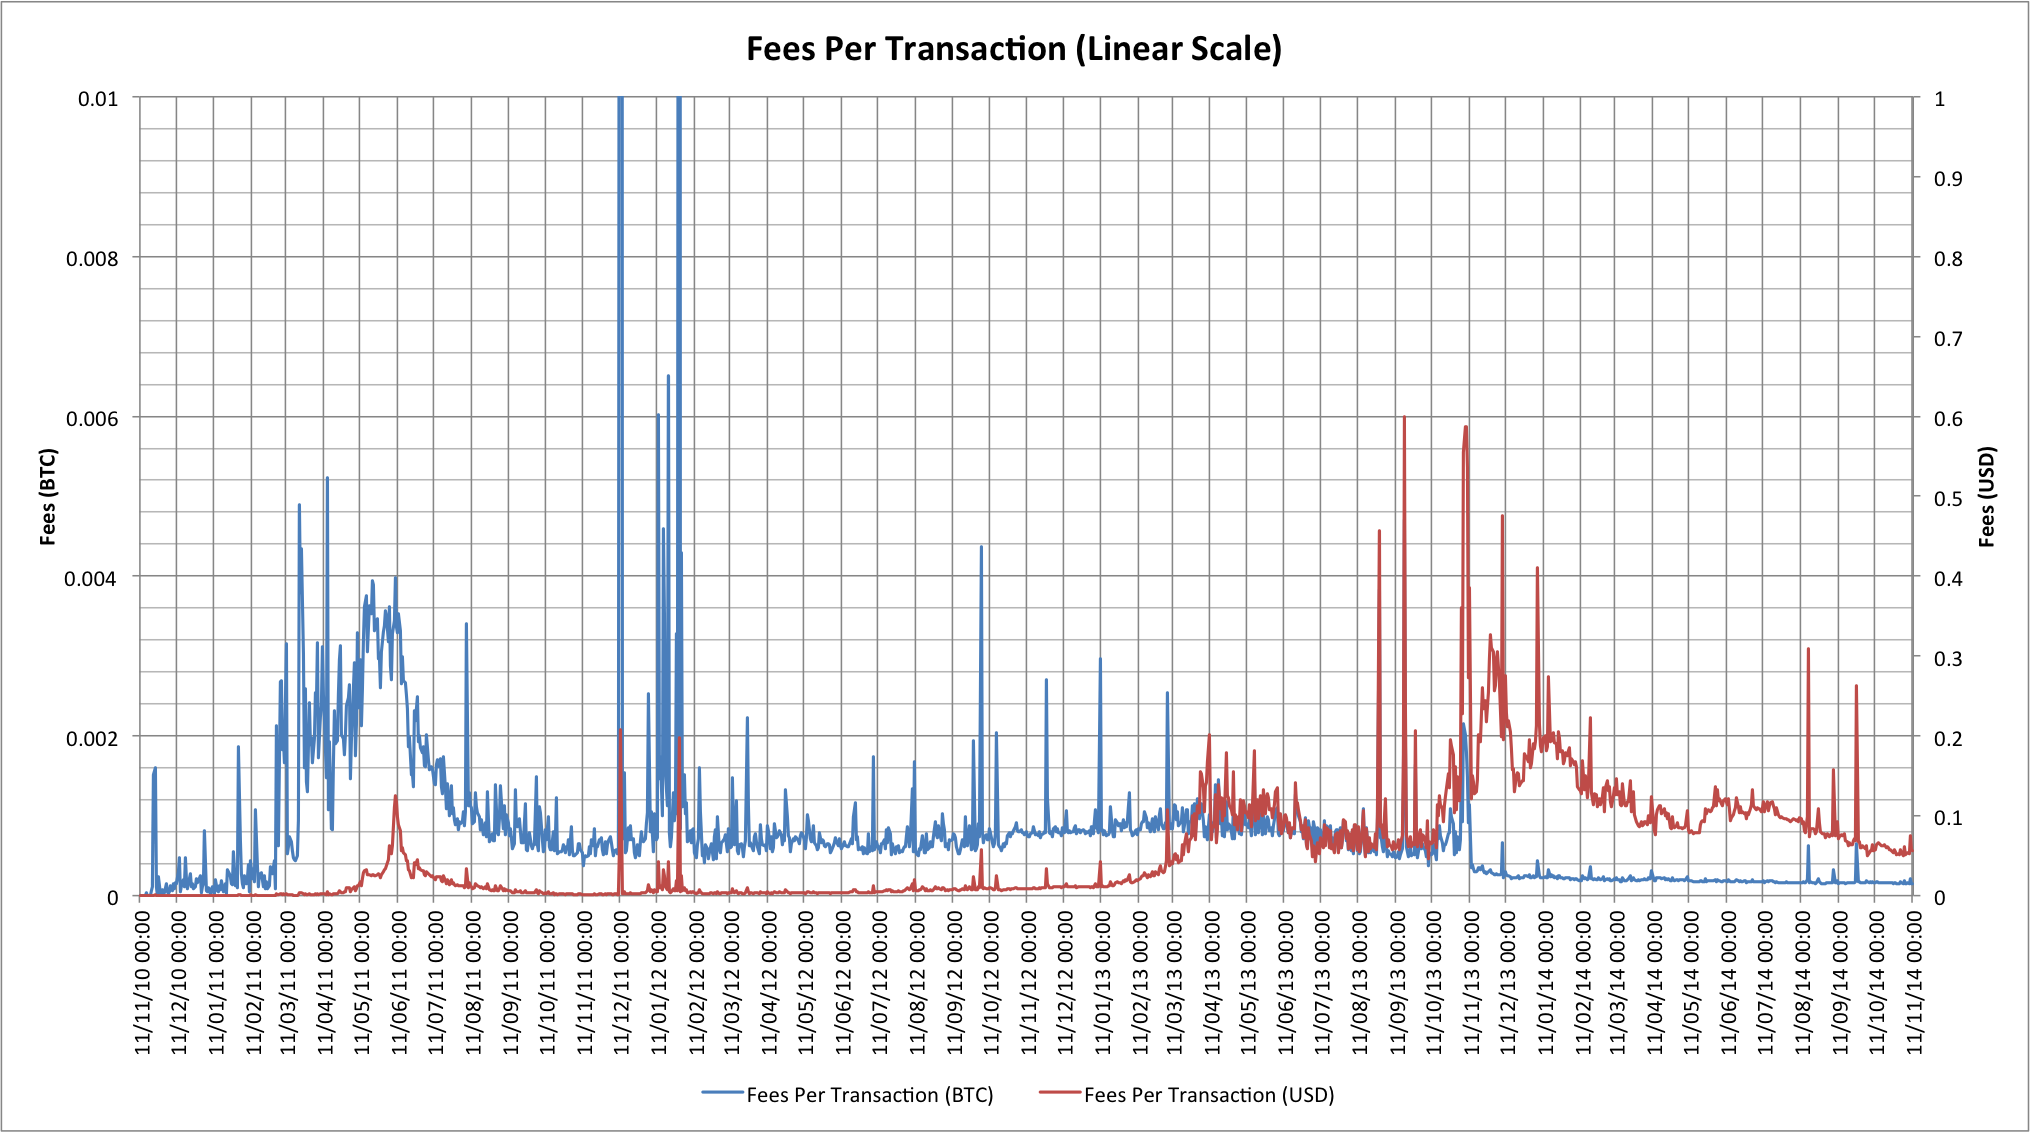 Mean cost per Bitcoin transaction for the last 4 years (linear scale)